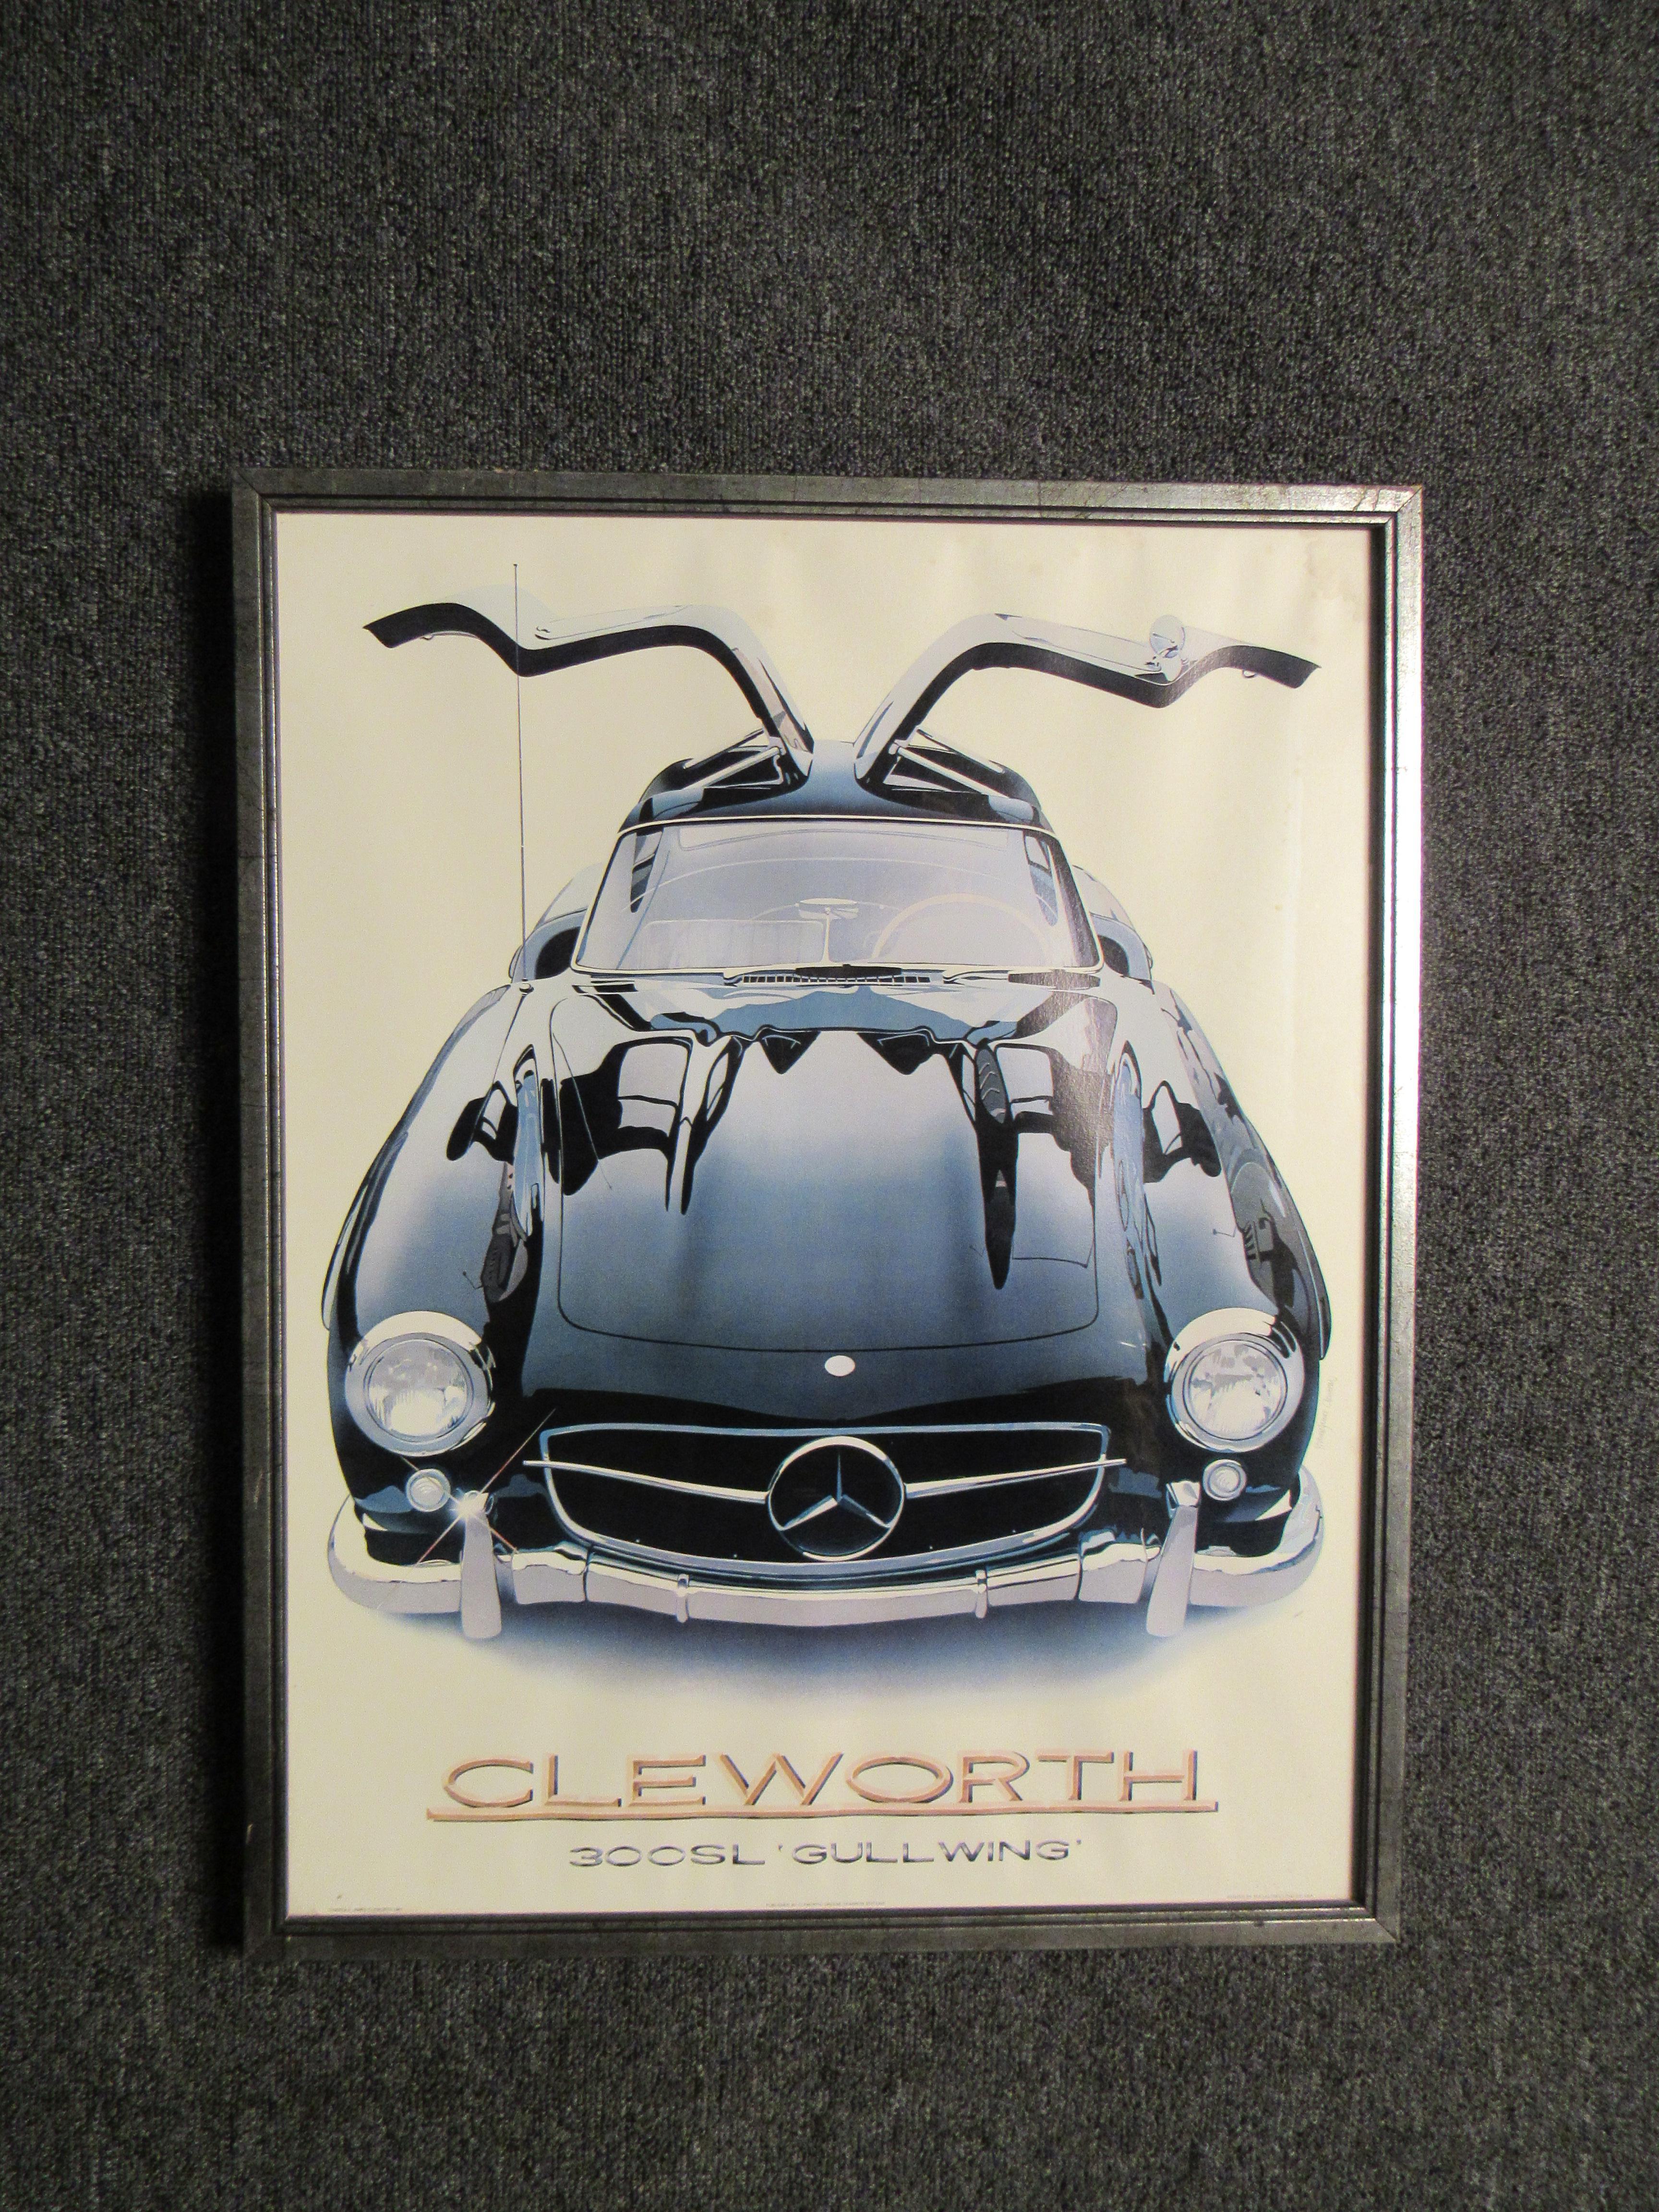 Leave boring home decor in the dust and move your art collection into the fast lane with this iconic framed lithograph from 1980's graphic design powerhouse, Harold James Chelworth. This exquisite portrait of a Mercedes Benz 300SL Gullwing coupe is